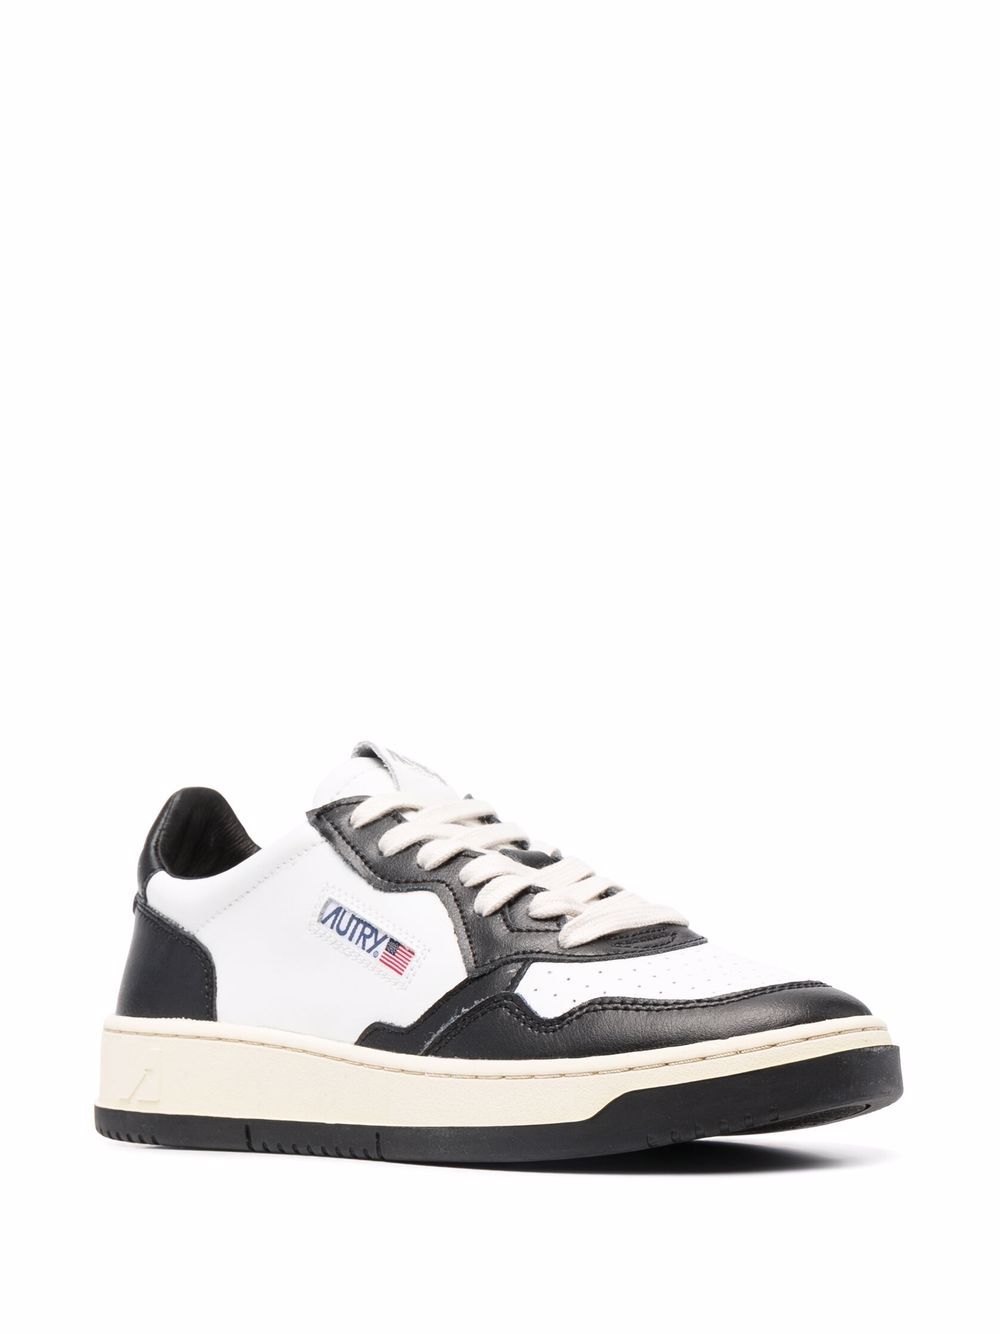 White and black leather sneakers